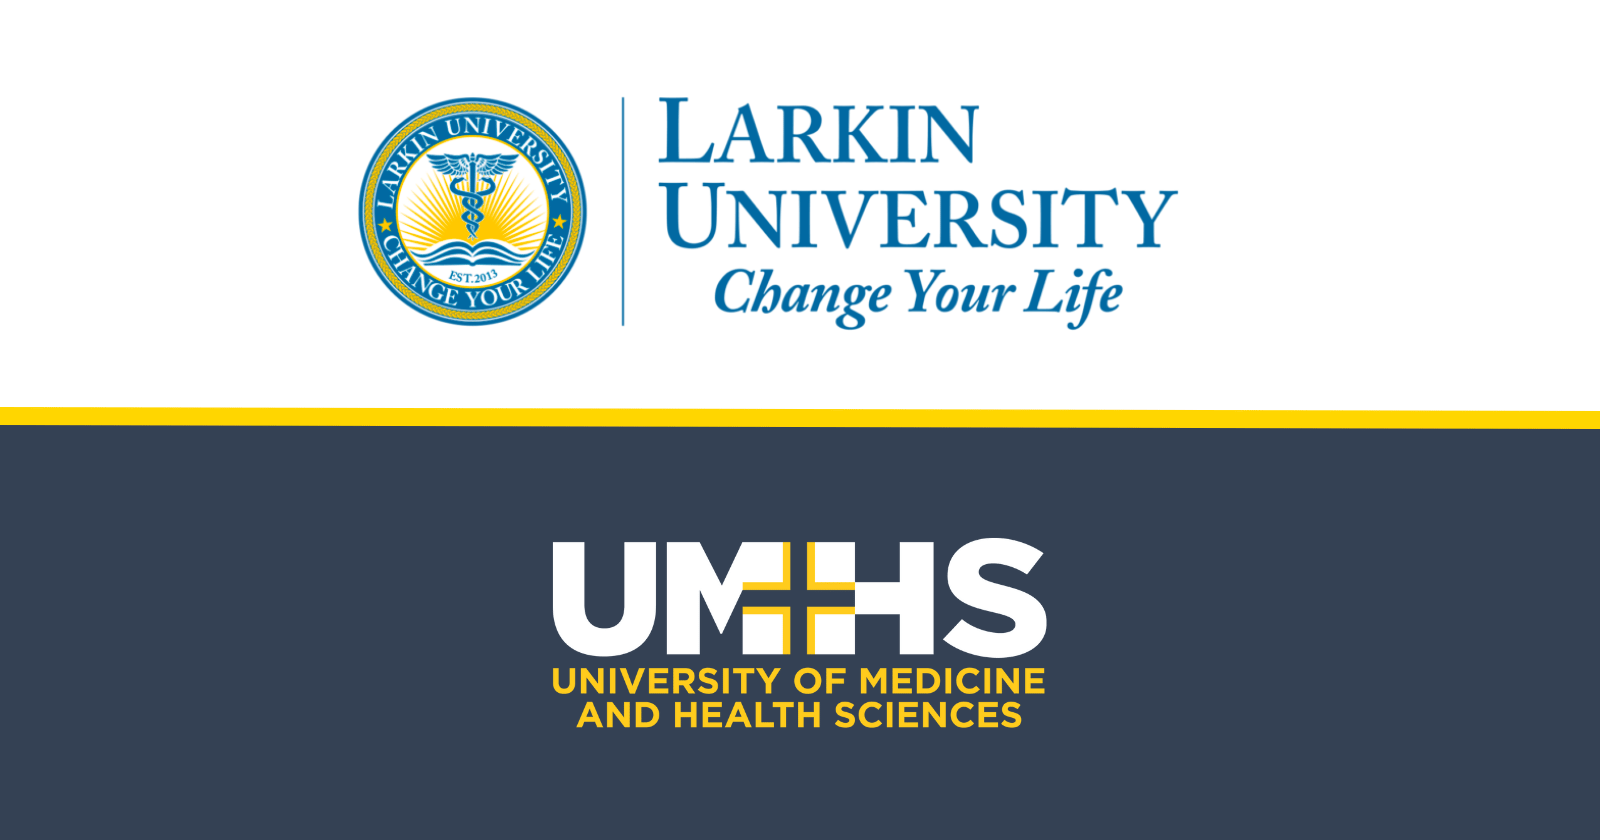 UMHS Signs Articulation Agreement with Larkin University